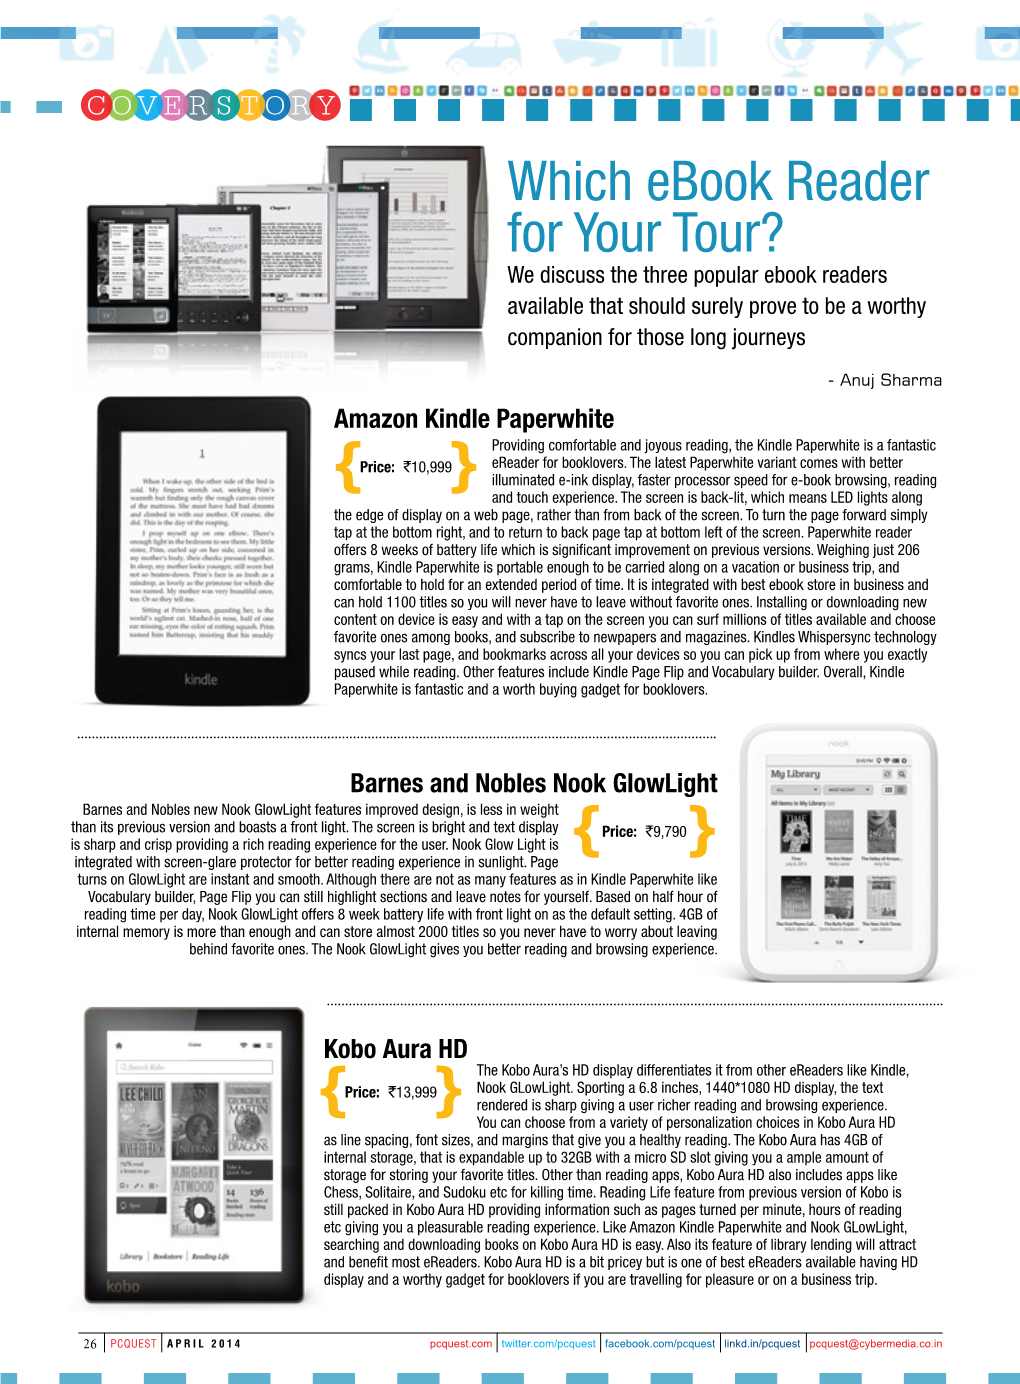 Which Ebook Reader for Your Tour? We Discuss the Three Popular Ebook Readers Available That Should Surely Prove to Be a Worthy Companion for Those Long Journeys